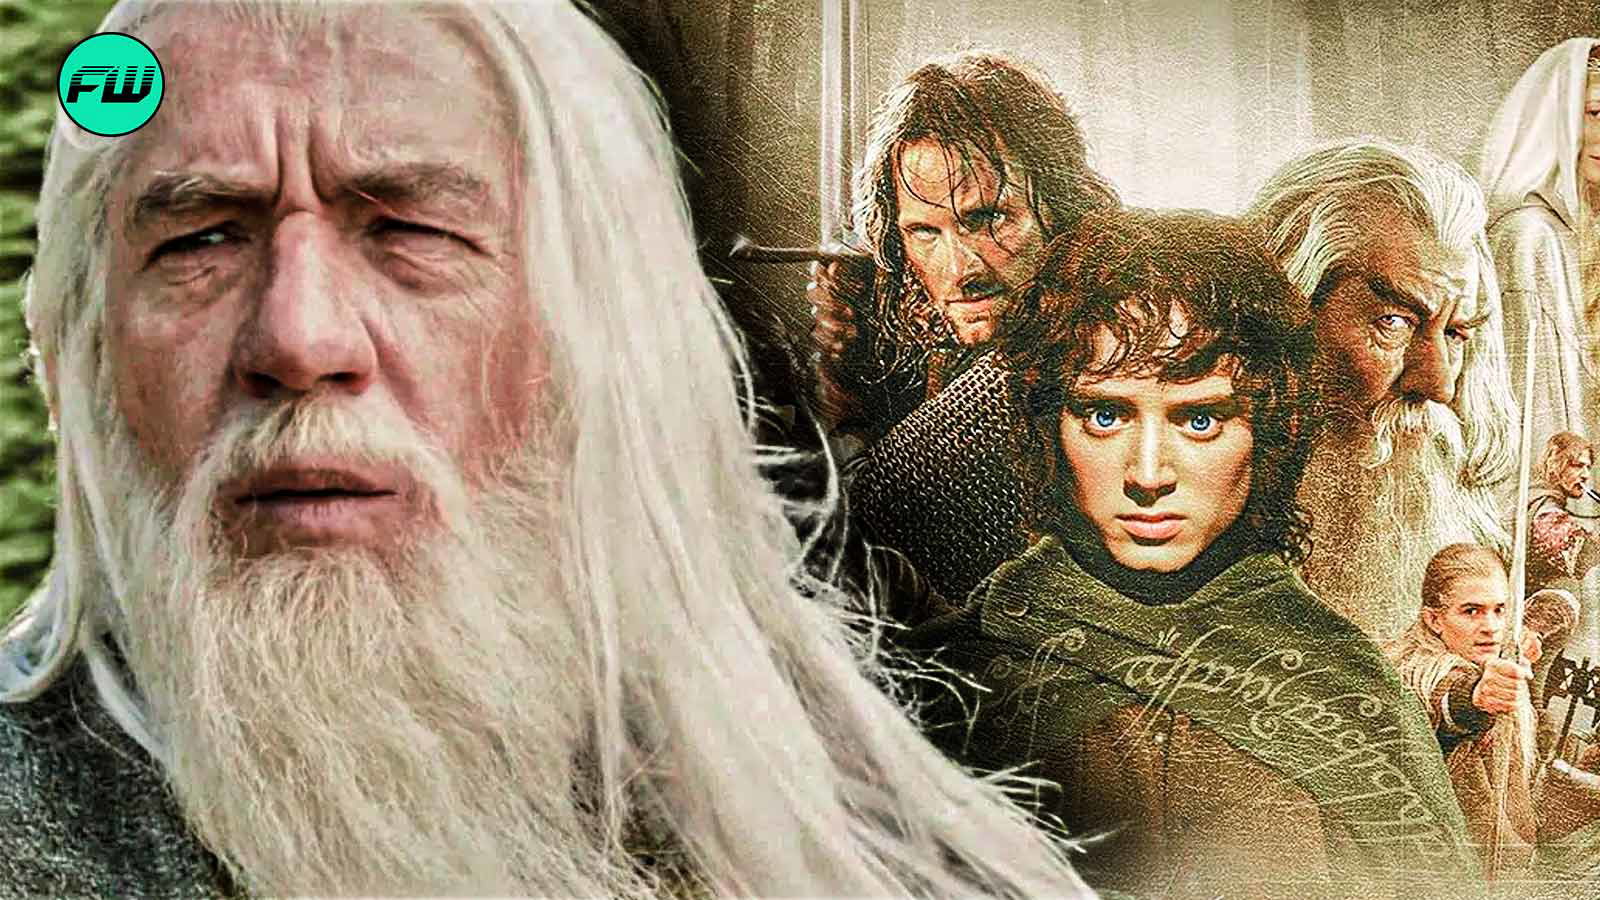 Ian McKellen and Lord of the Rings